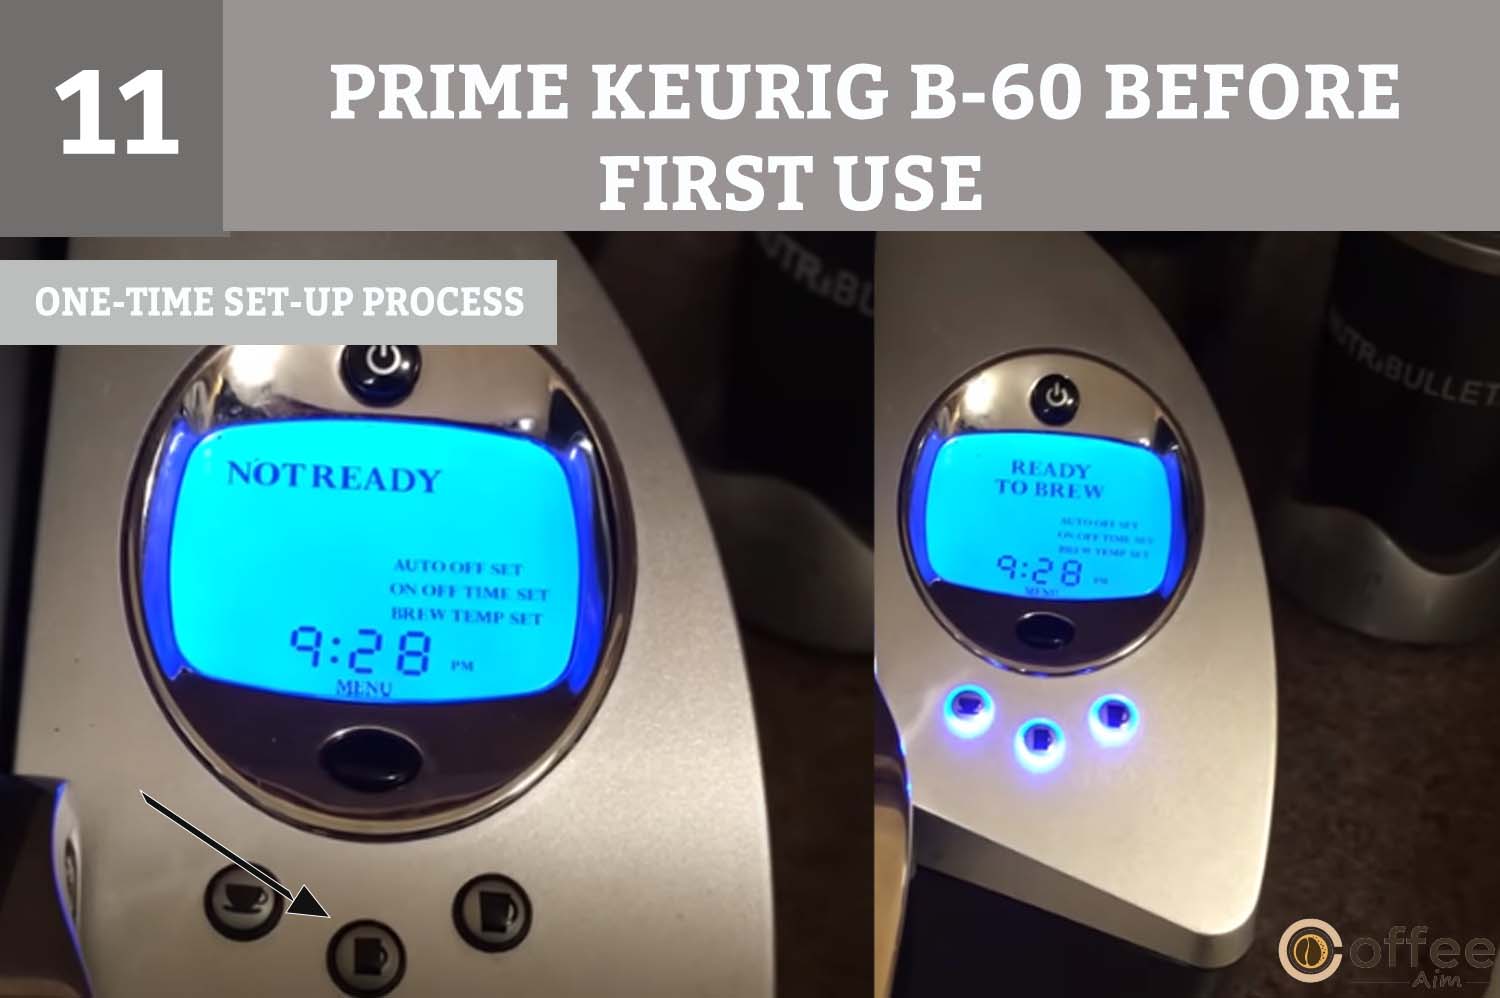 After completing the one-time set-up process, you are now prepared to start brewing with your Keurig B-77 coffee maker. Enjoy your favorite beverages!